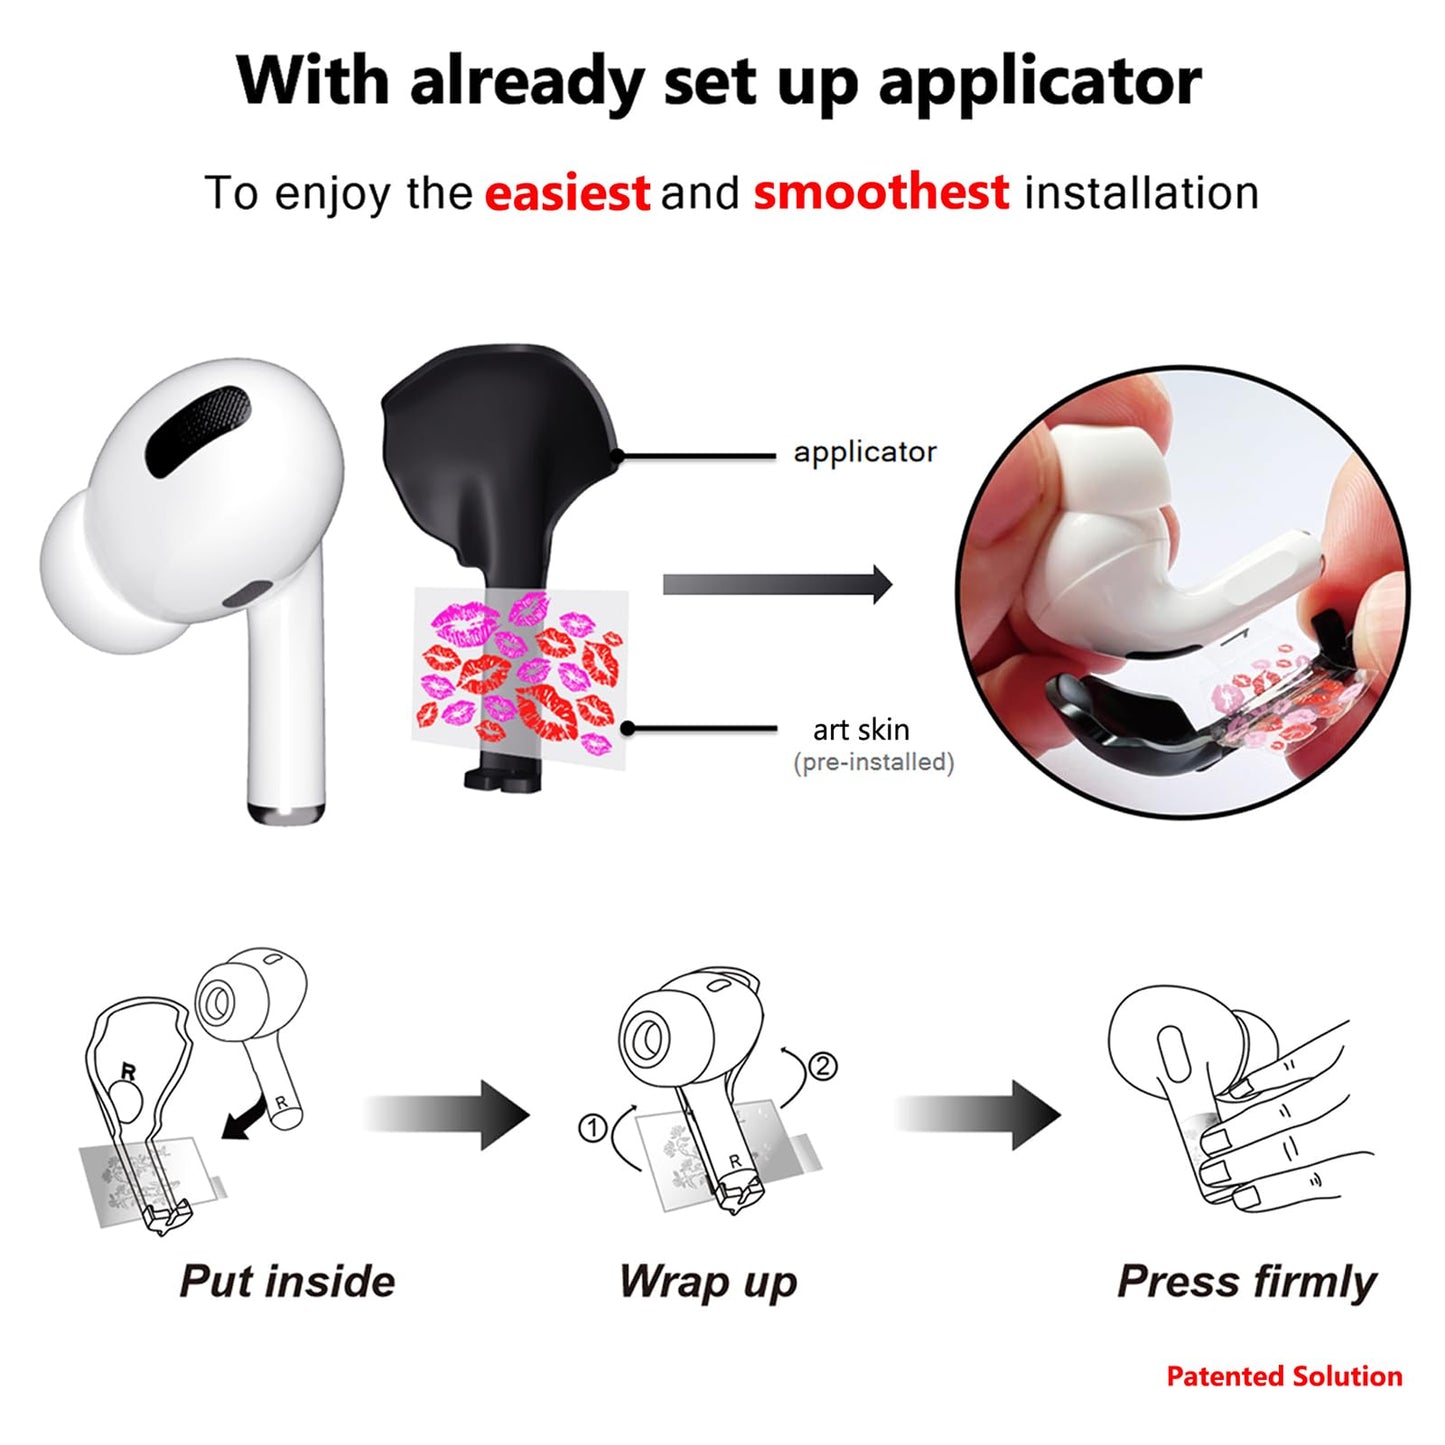 ROCKMAX for AirPods Pro 2 Skin Accessories, Custom Christmas Decor Sticker for Men, Women, Boys and Girls Gift, Unique Tattoos Compatible to AirPods Pro 2nd Generation Case Cover, with Cleaning Kit